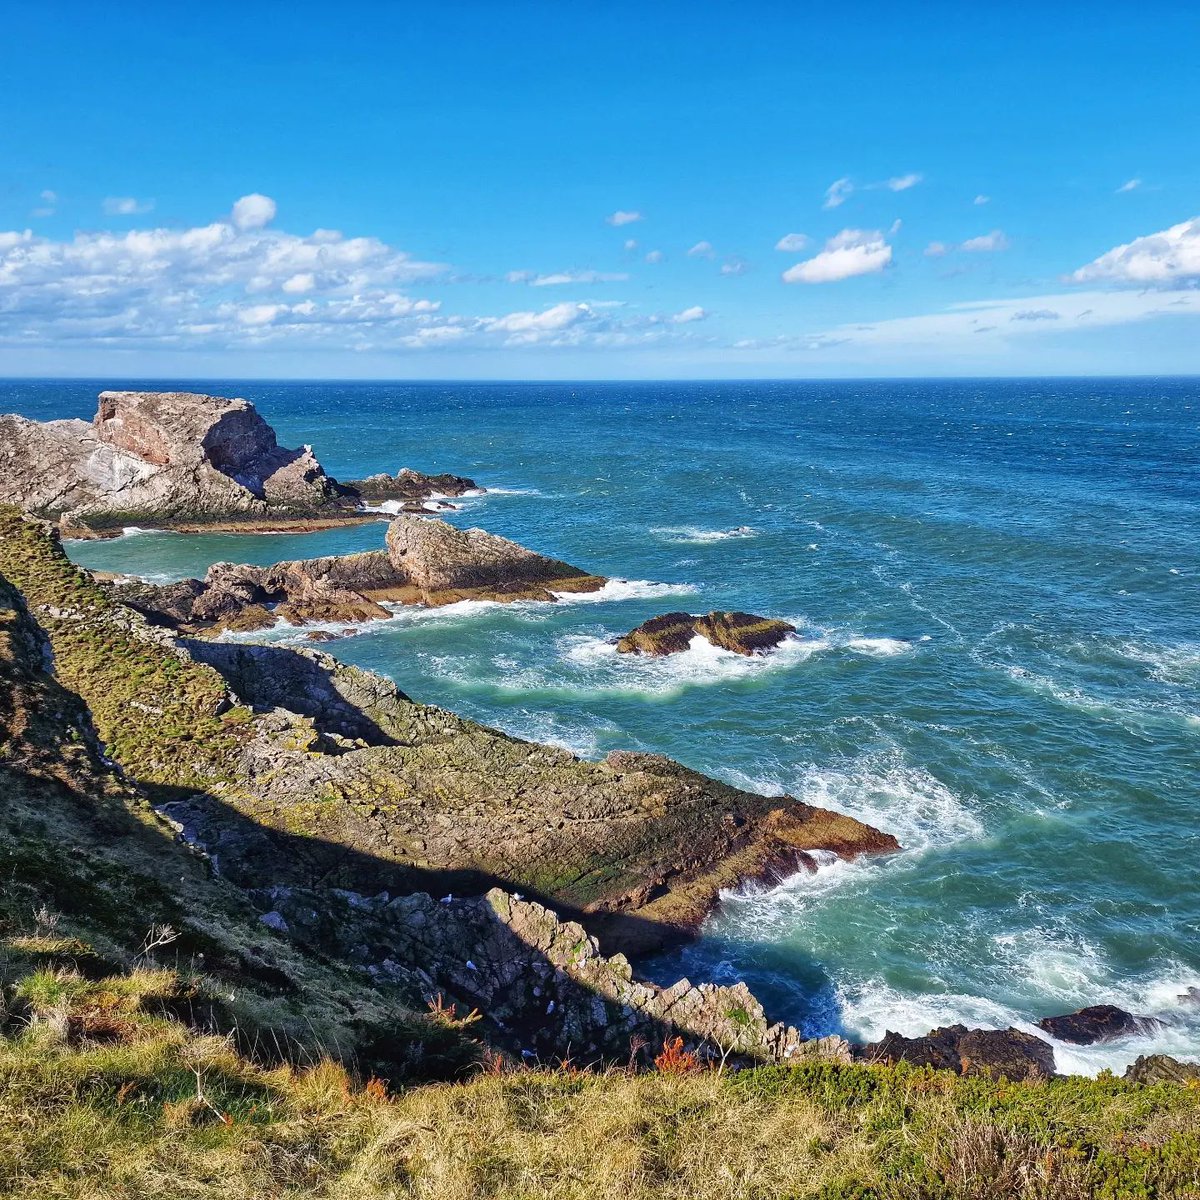 As the summer days begin to kick in lets look at one of the most beautiful walks in Moray Speyside 😍 #EscapeYourEveryday Where will you be spending your summer days? 👇 morayspeyside.com 📌 - Moray Firth Coast, Moray Speyside 📷 - bencookman (IG)